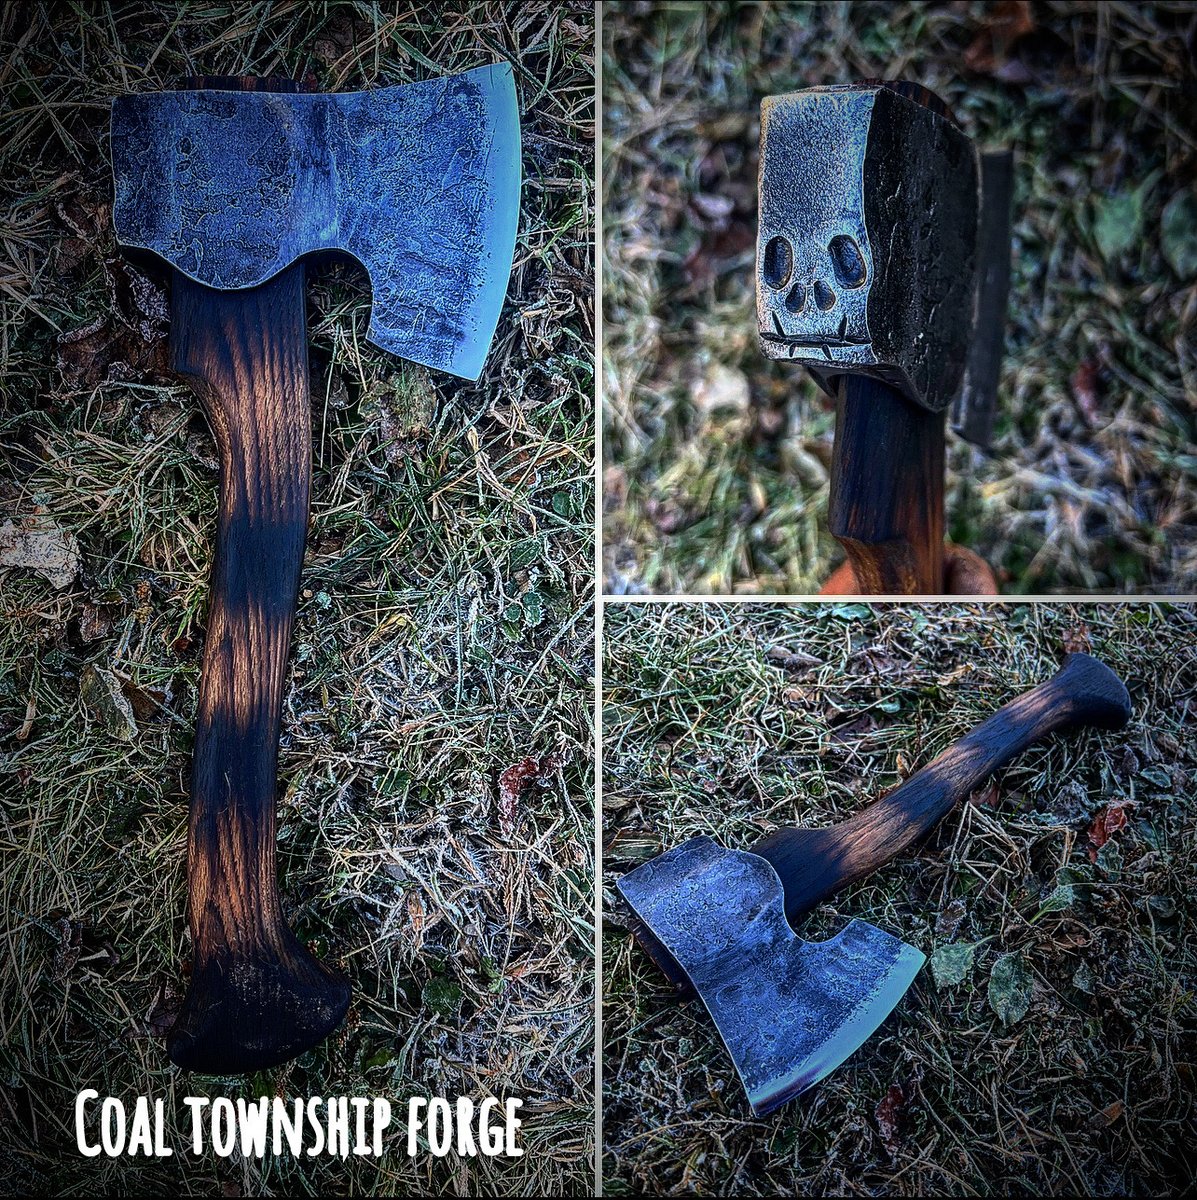 Handforged Carving Axe (made to order)